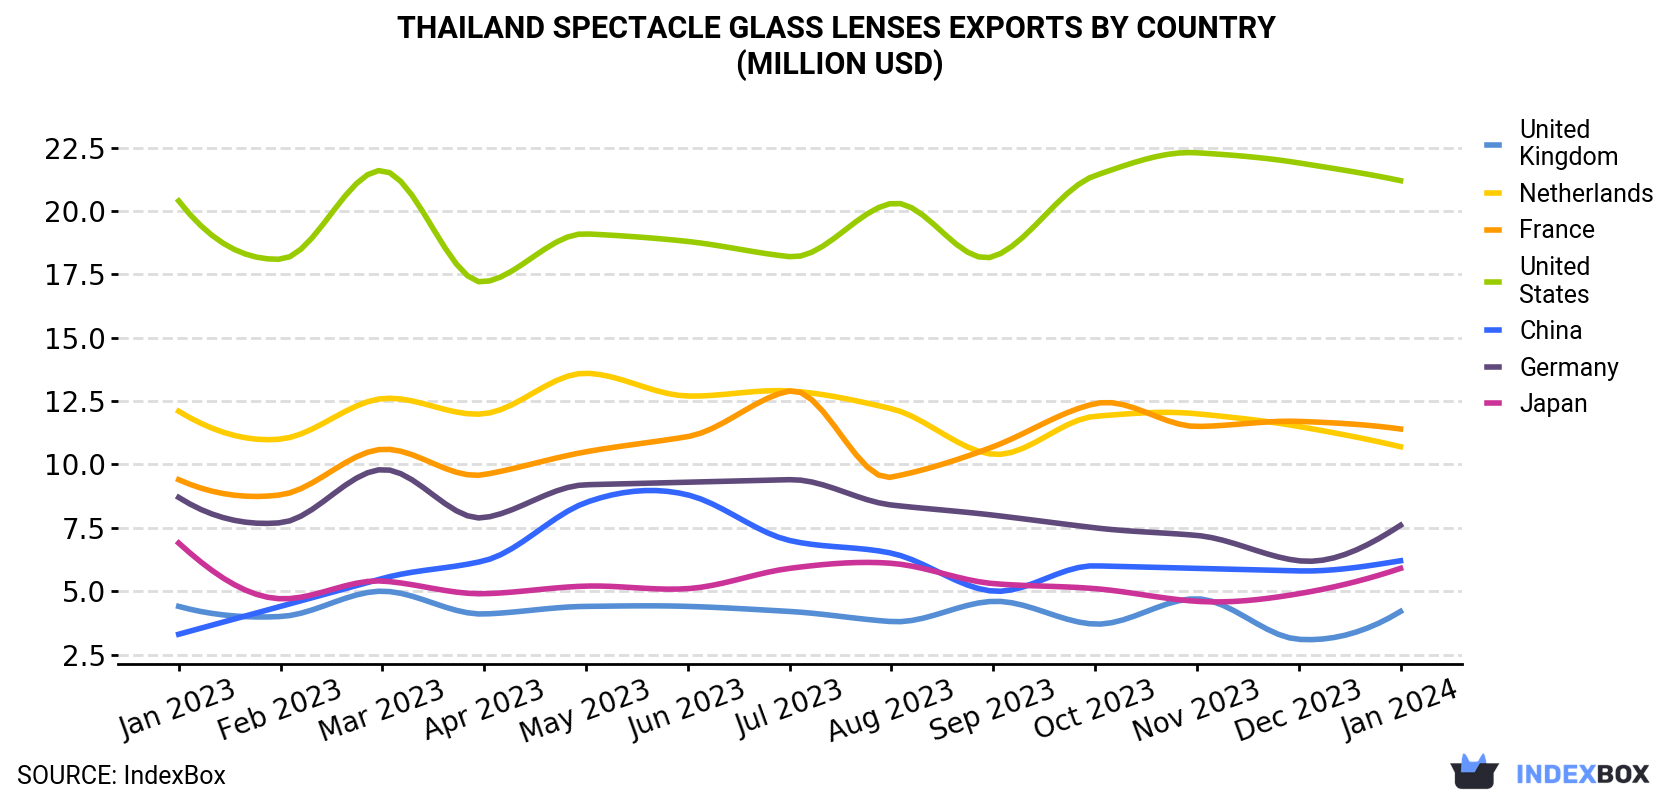 Thailand Spectacle Glass Lenses Exports By Country (Million USD)